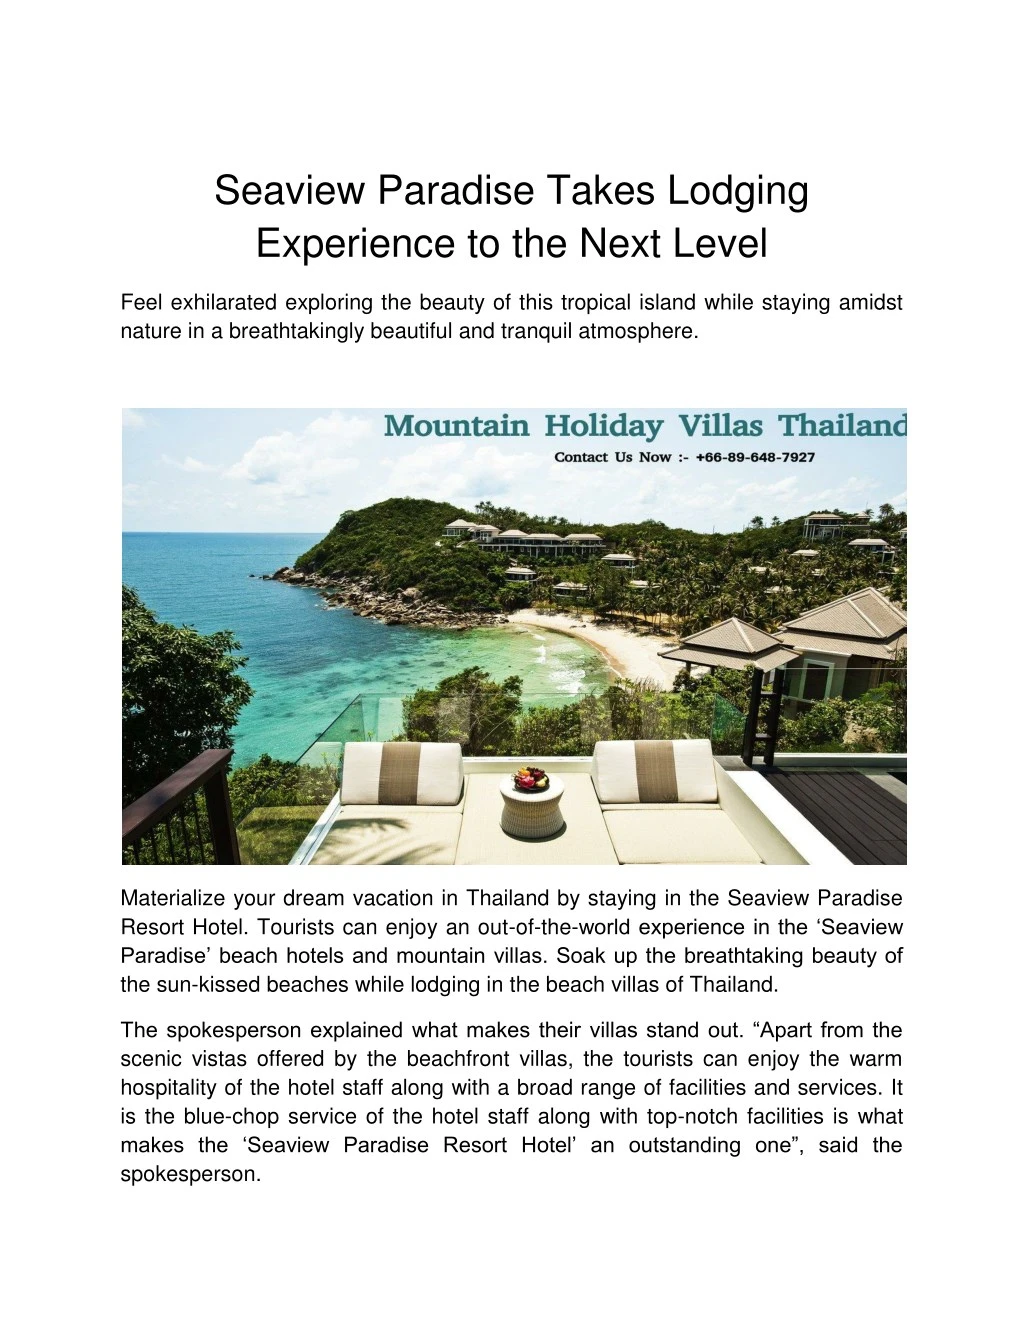 seaview paradise takes lodging experience